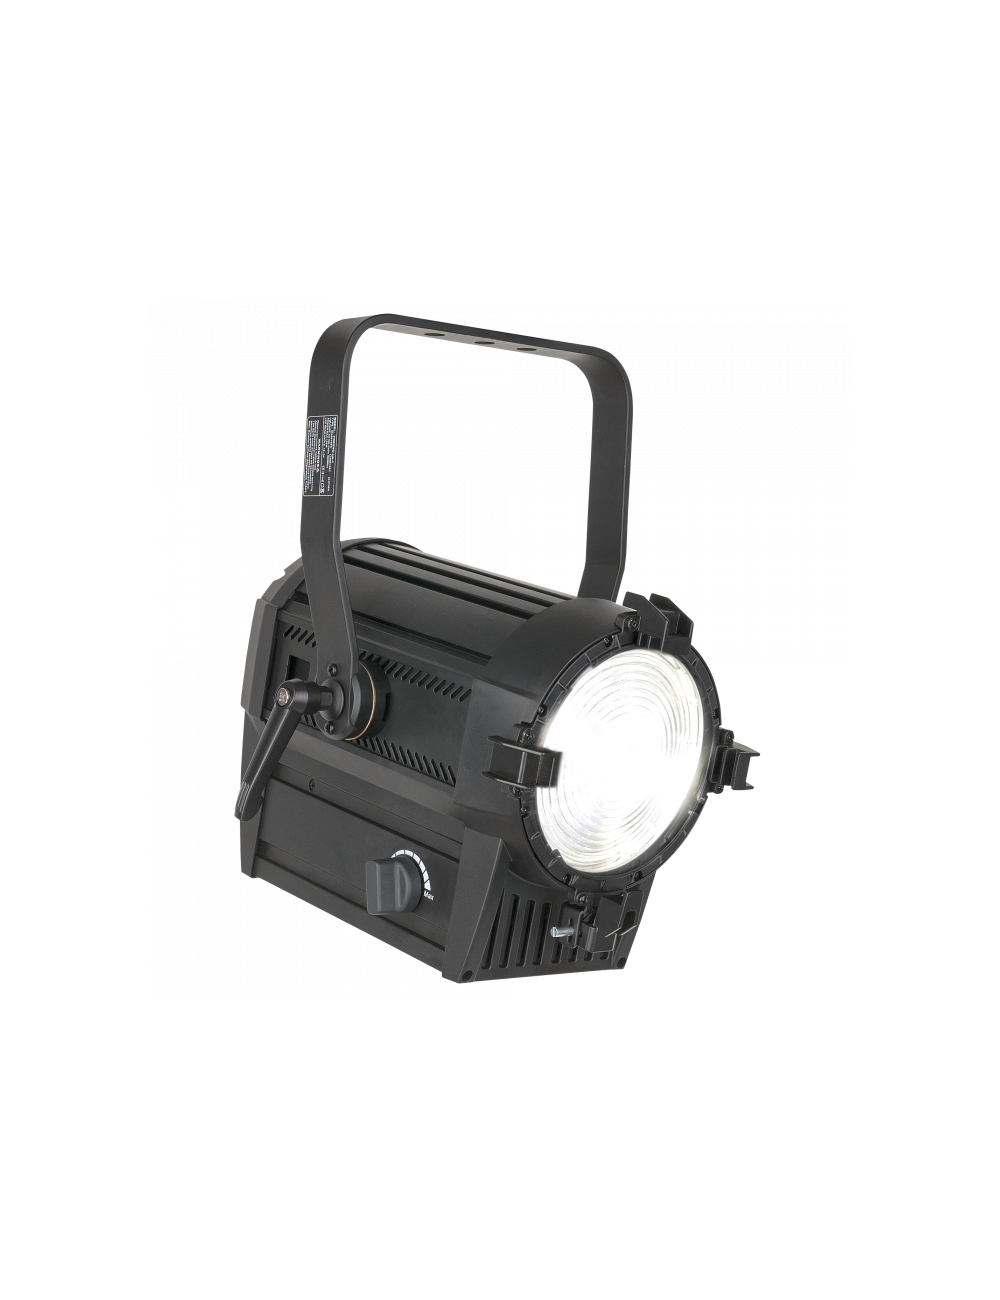 SHOWTEC Performer 1000 LED MKII Daylight